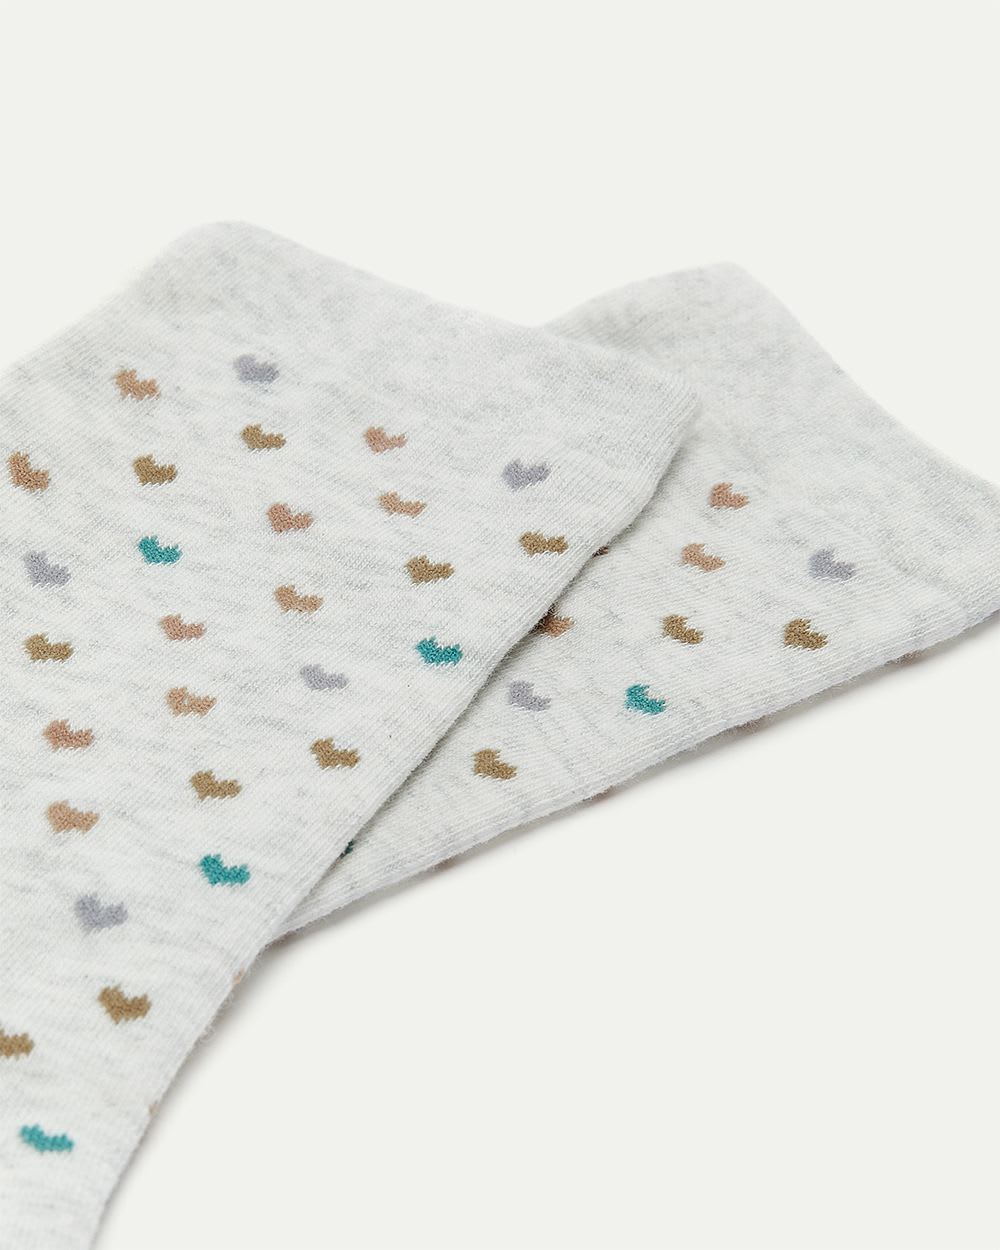 Cotton Socks with Heart Pattern